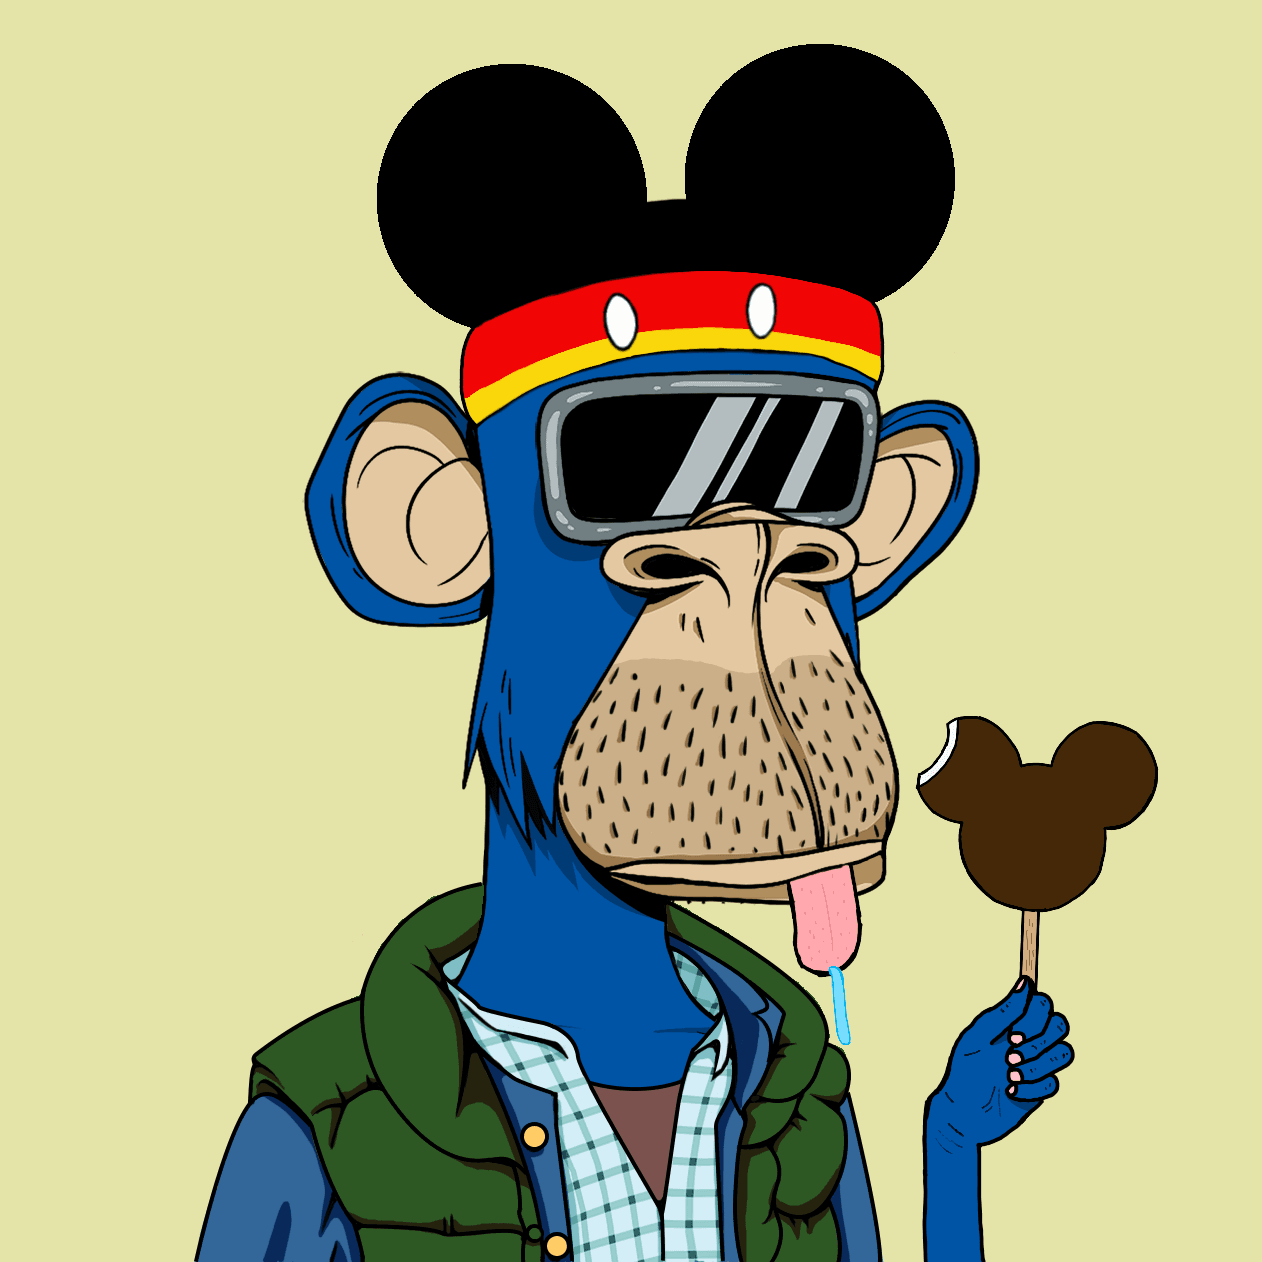 Mousehat